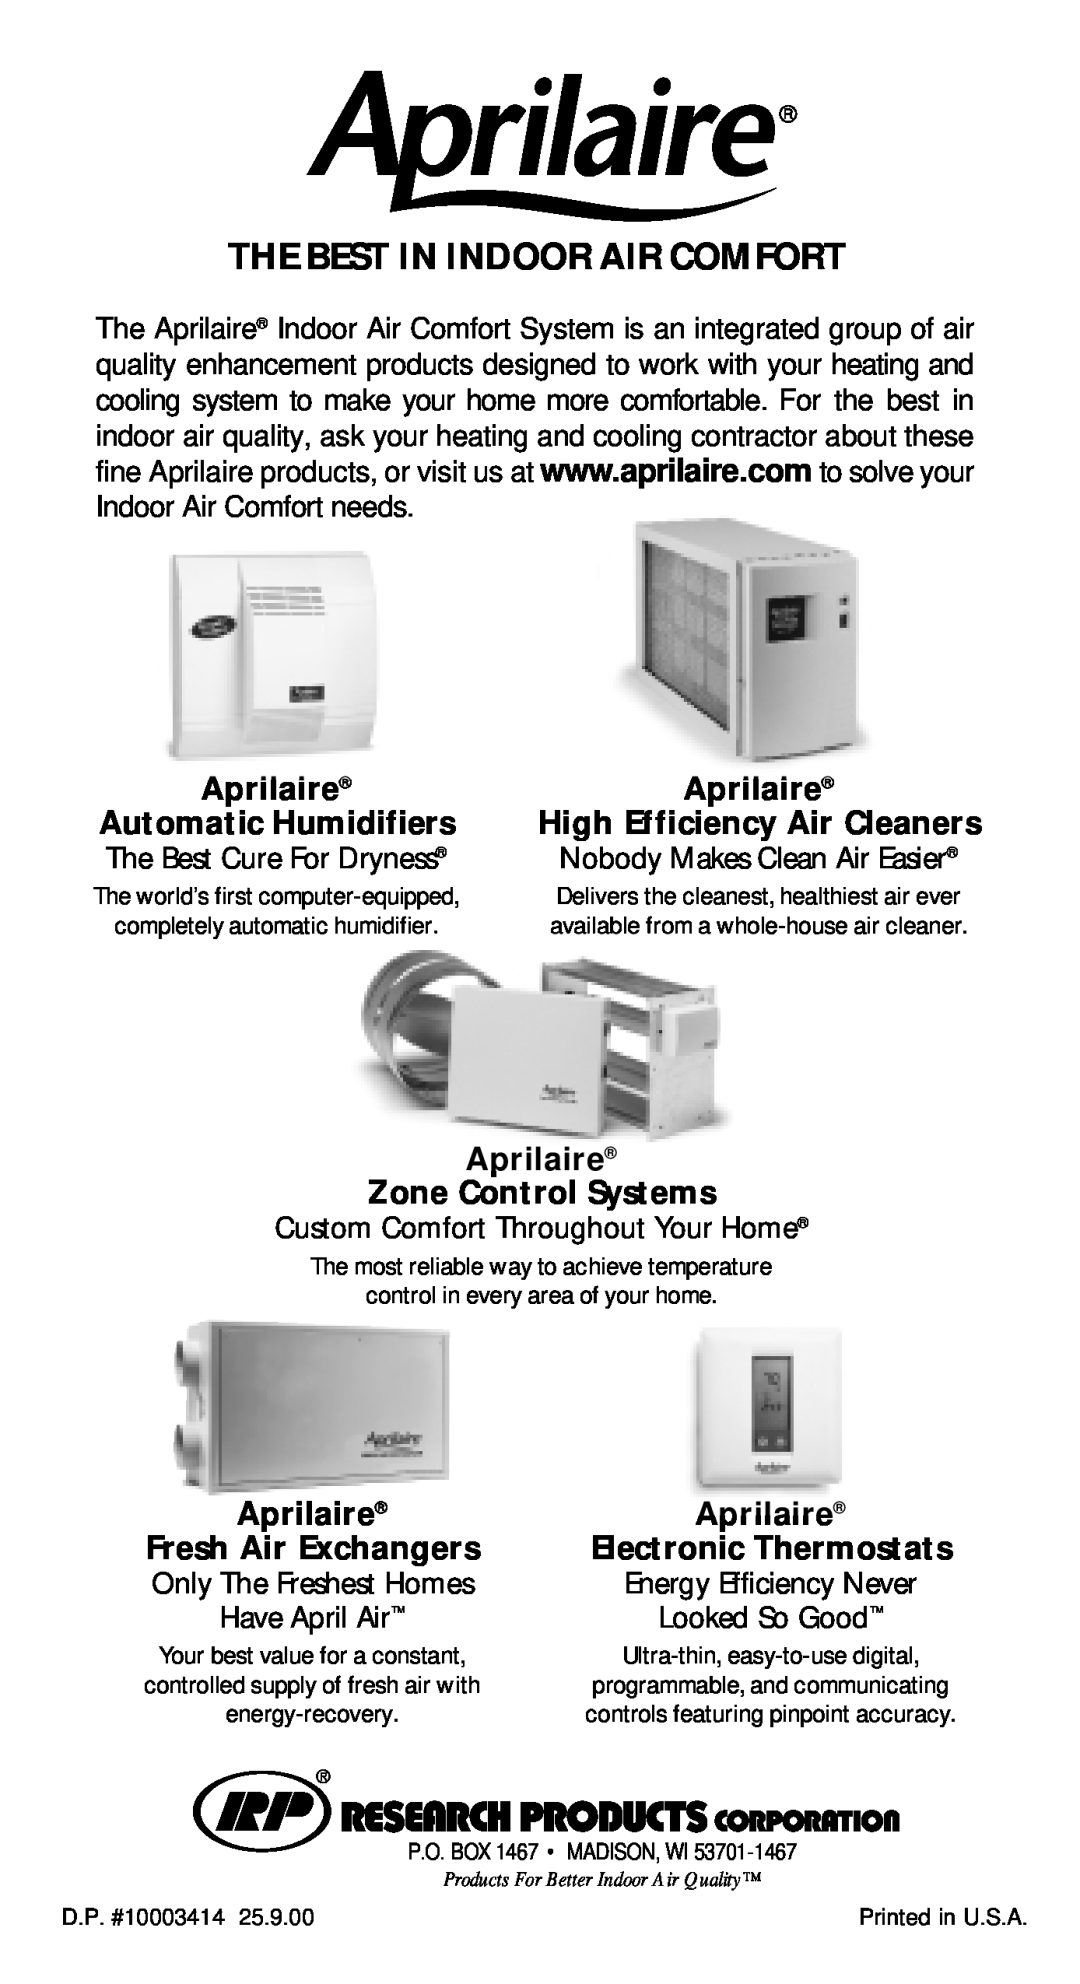 Aprilaire 2250 & 2400 The Best In Indoor Air Comfort, Aprilaire, Automatic Humidifiers, High Efficiency Air Cleaners 